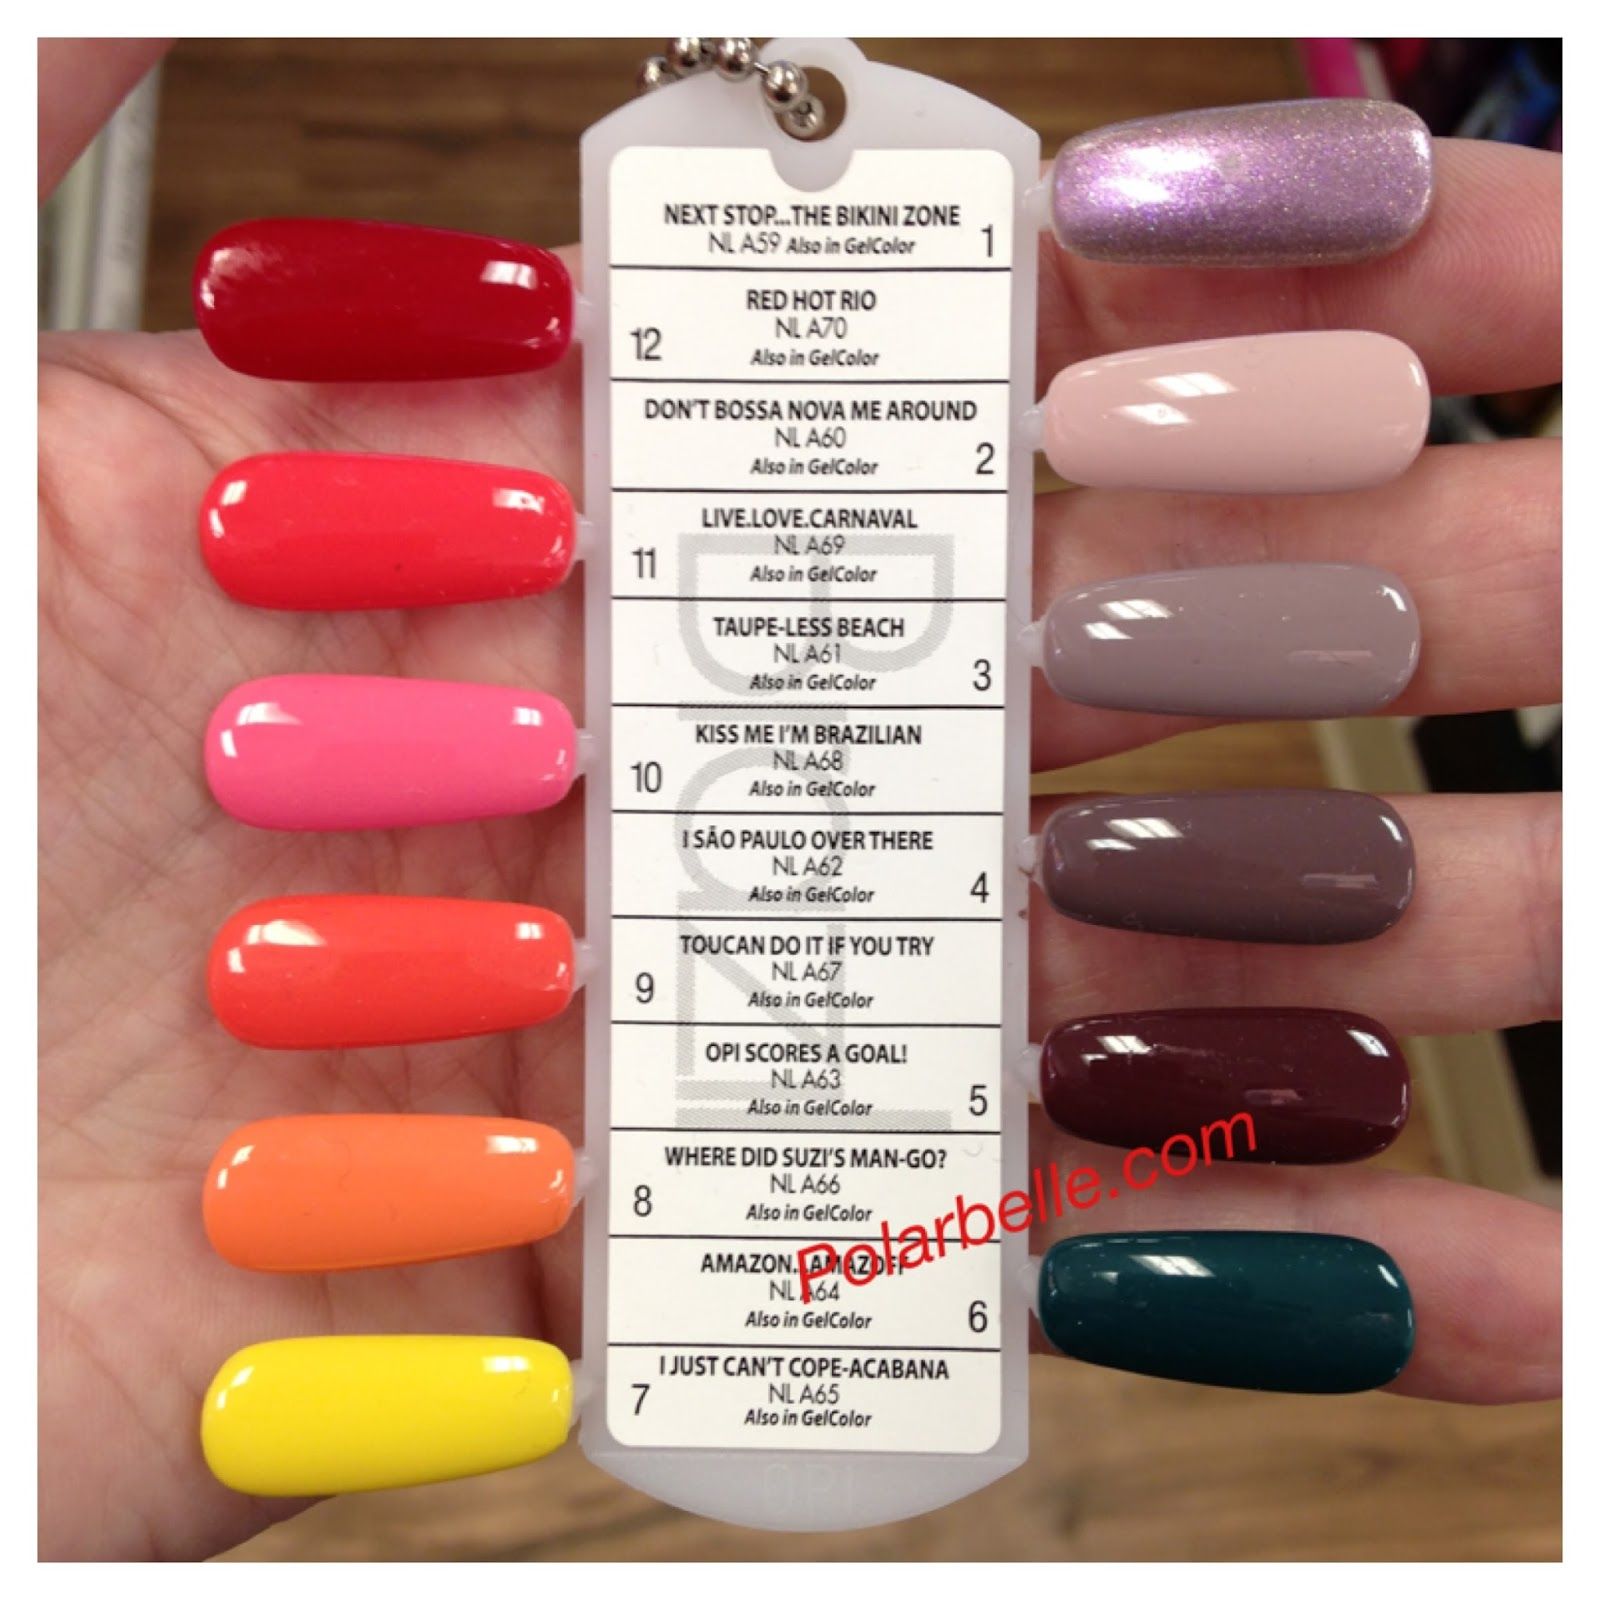 New Opi Brazil Nail Polish Collection Pics Swatches With Names Polarbelle Nail Polish Color Names Opi Gel Nails Opi Gel Nail Polish